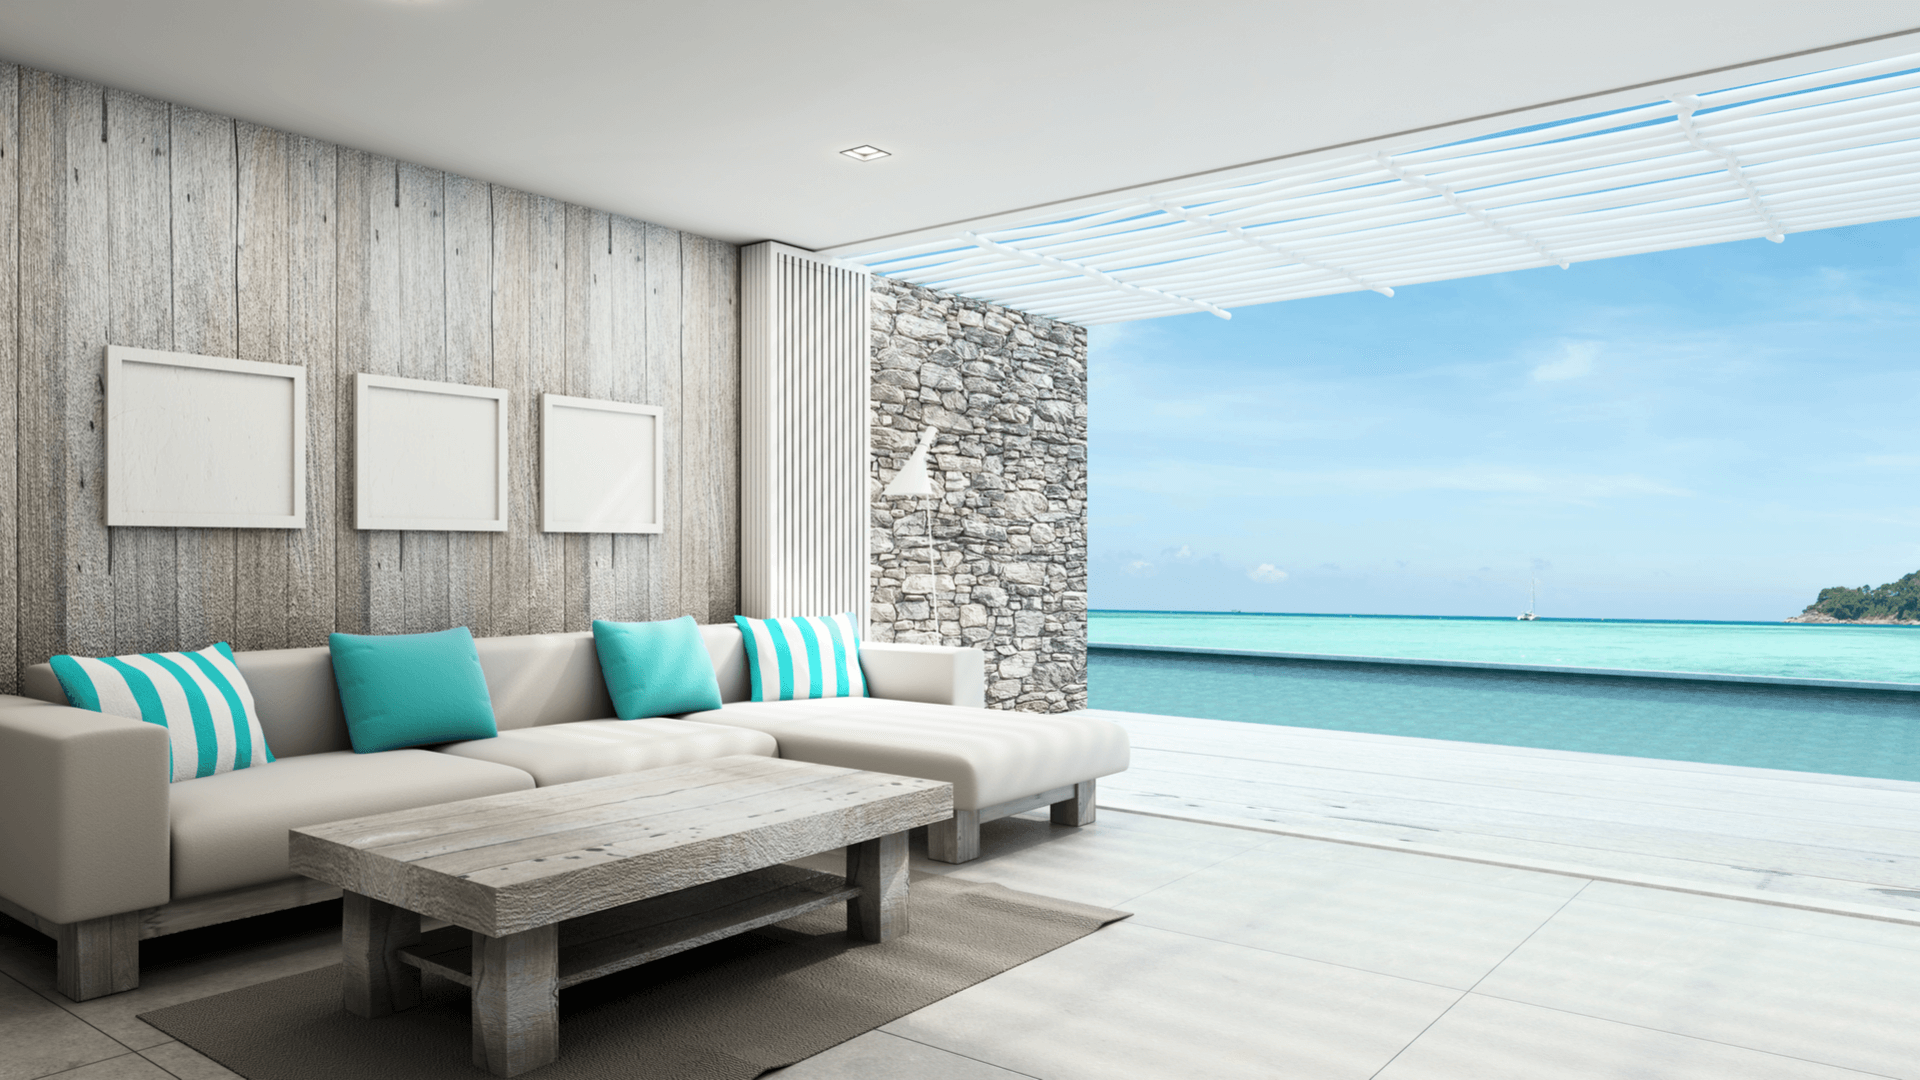 Chic Beach House Interior Design Ideas Spotted!